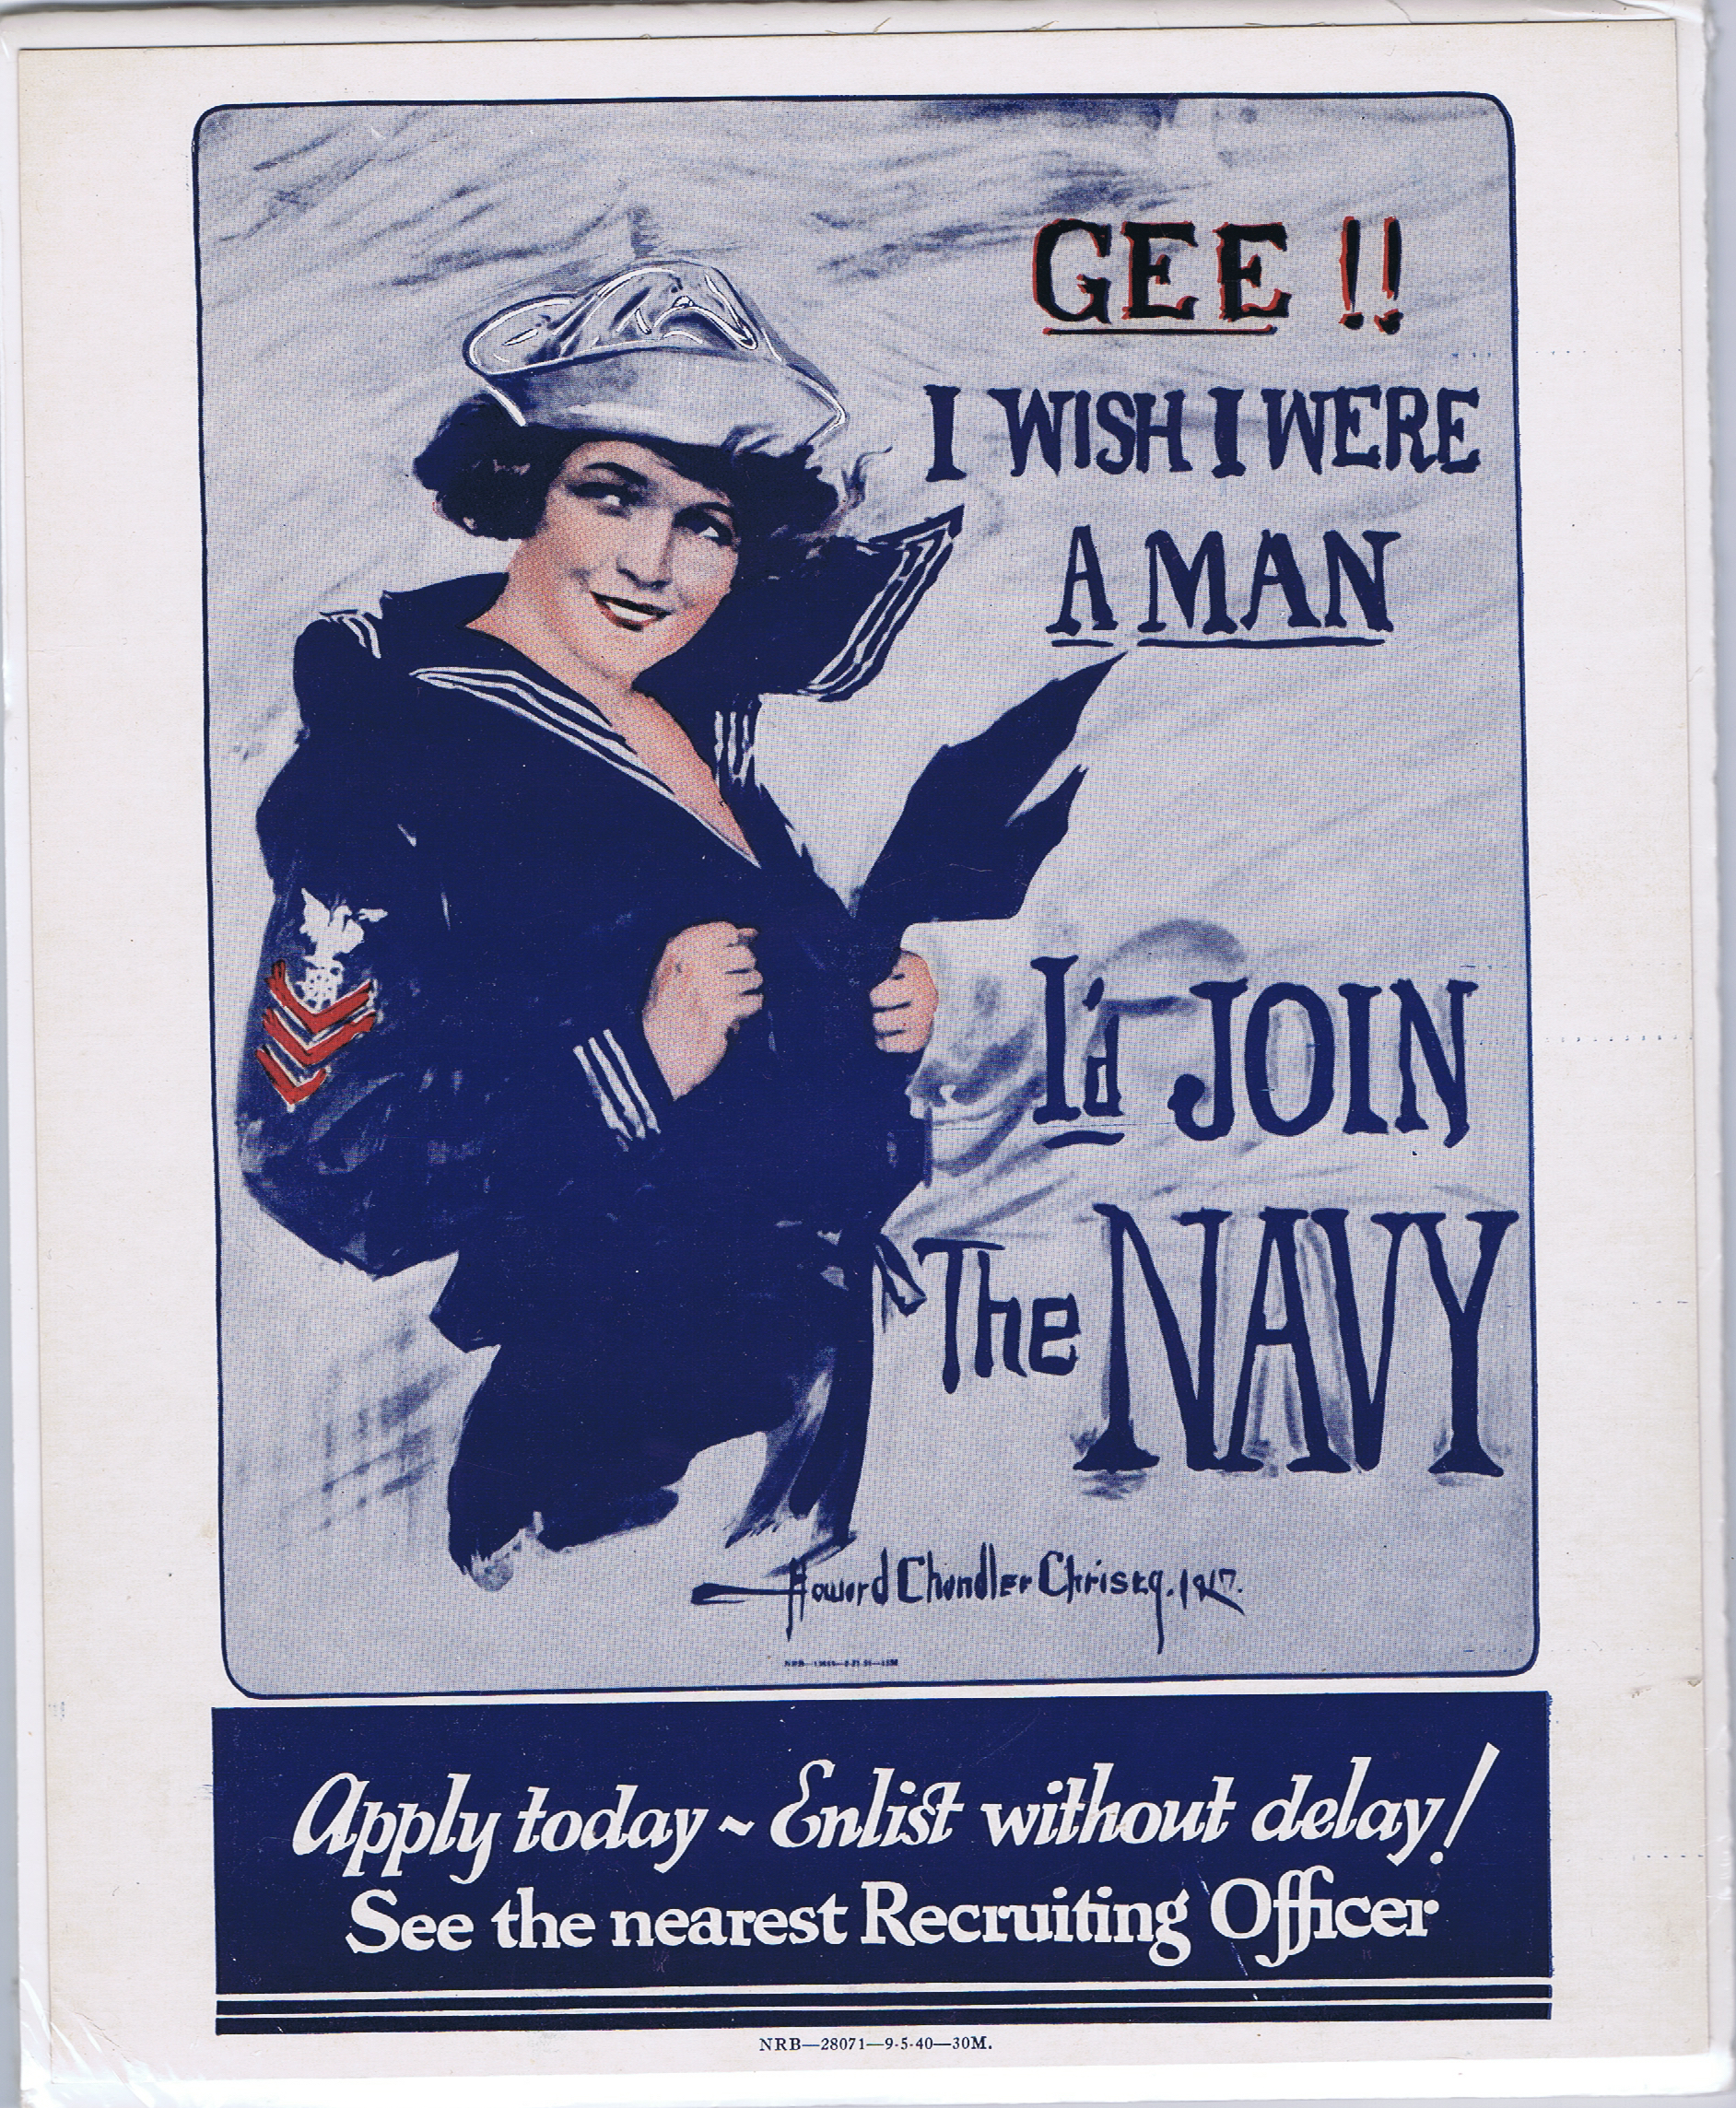 J840	GEE!! I WISH I WERE A MAN - I’D JOIN THE NAVY - APPLY TODAY - ENLIST WITHOUT DELAY!